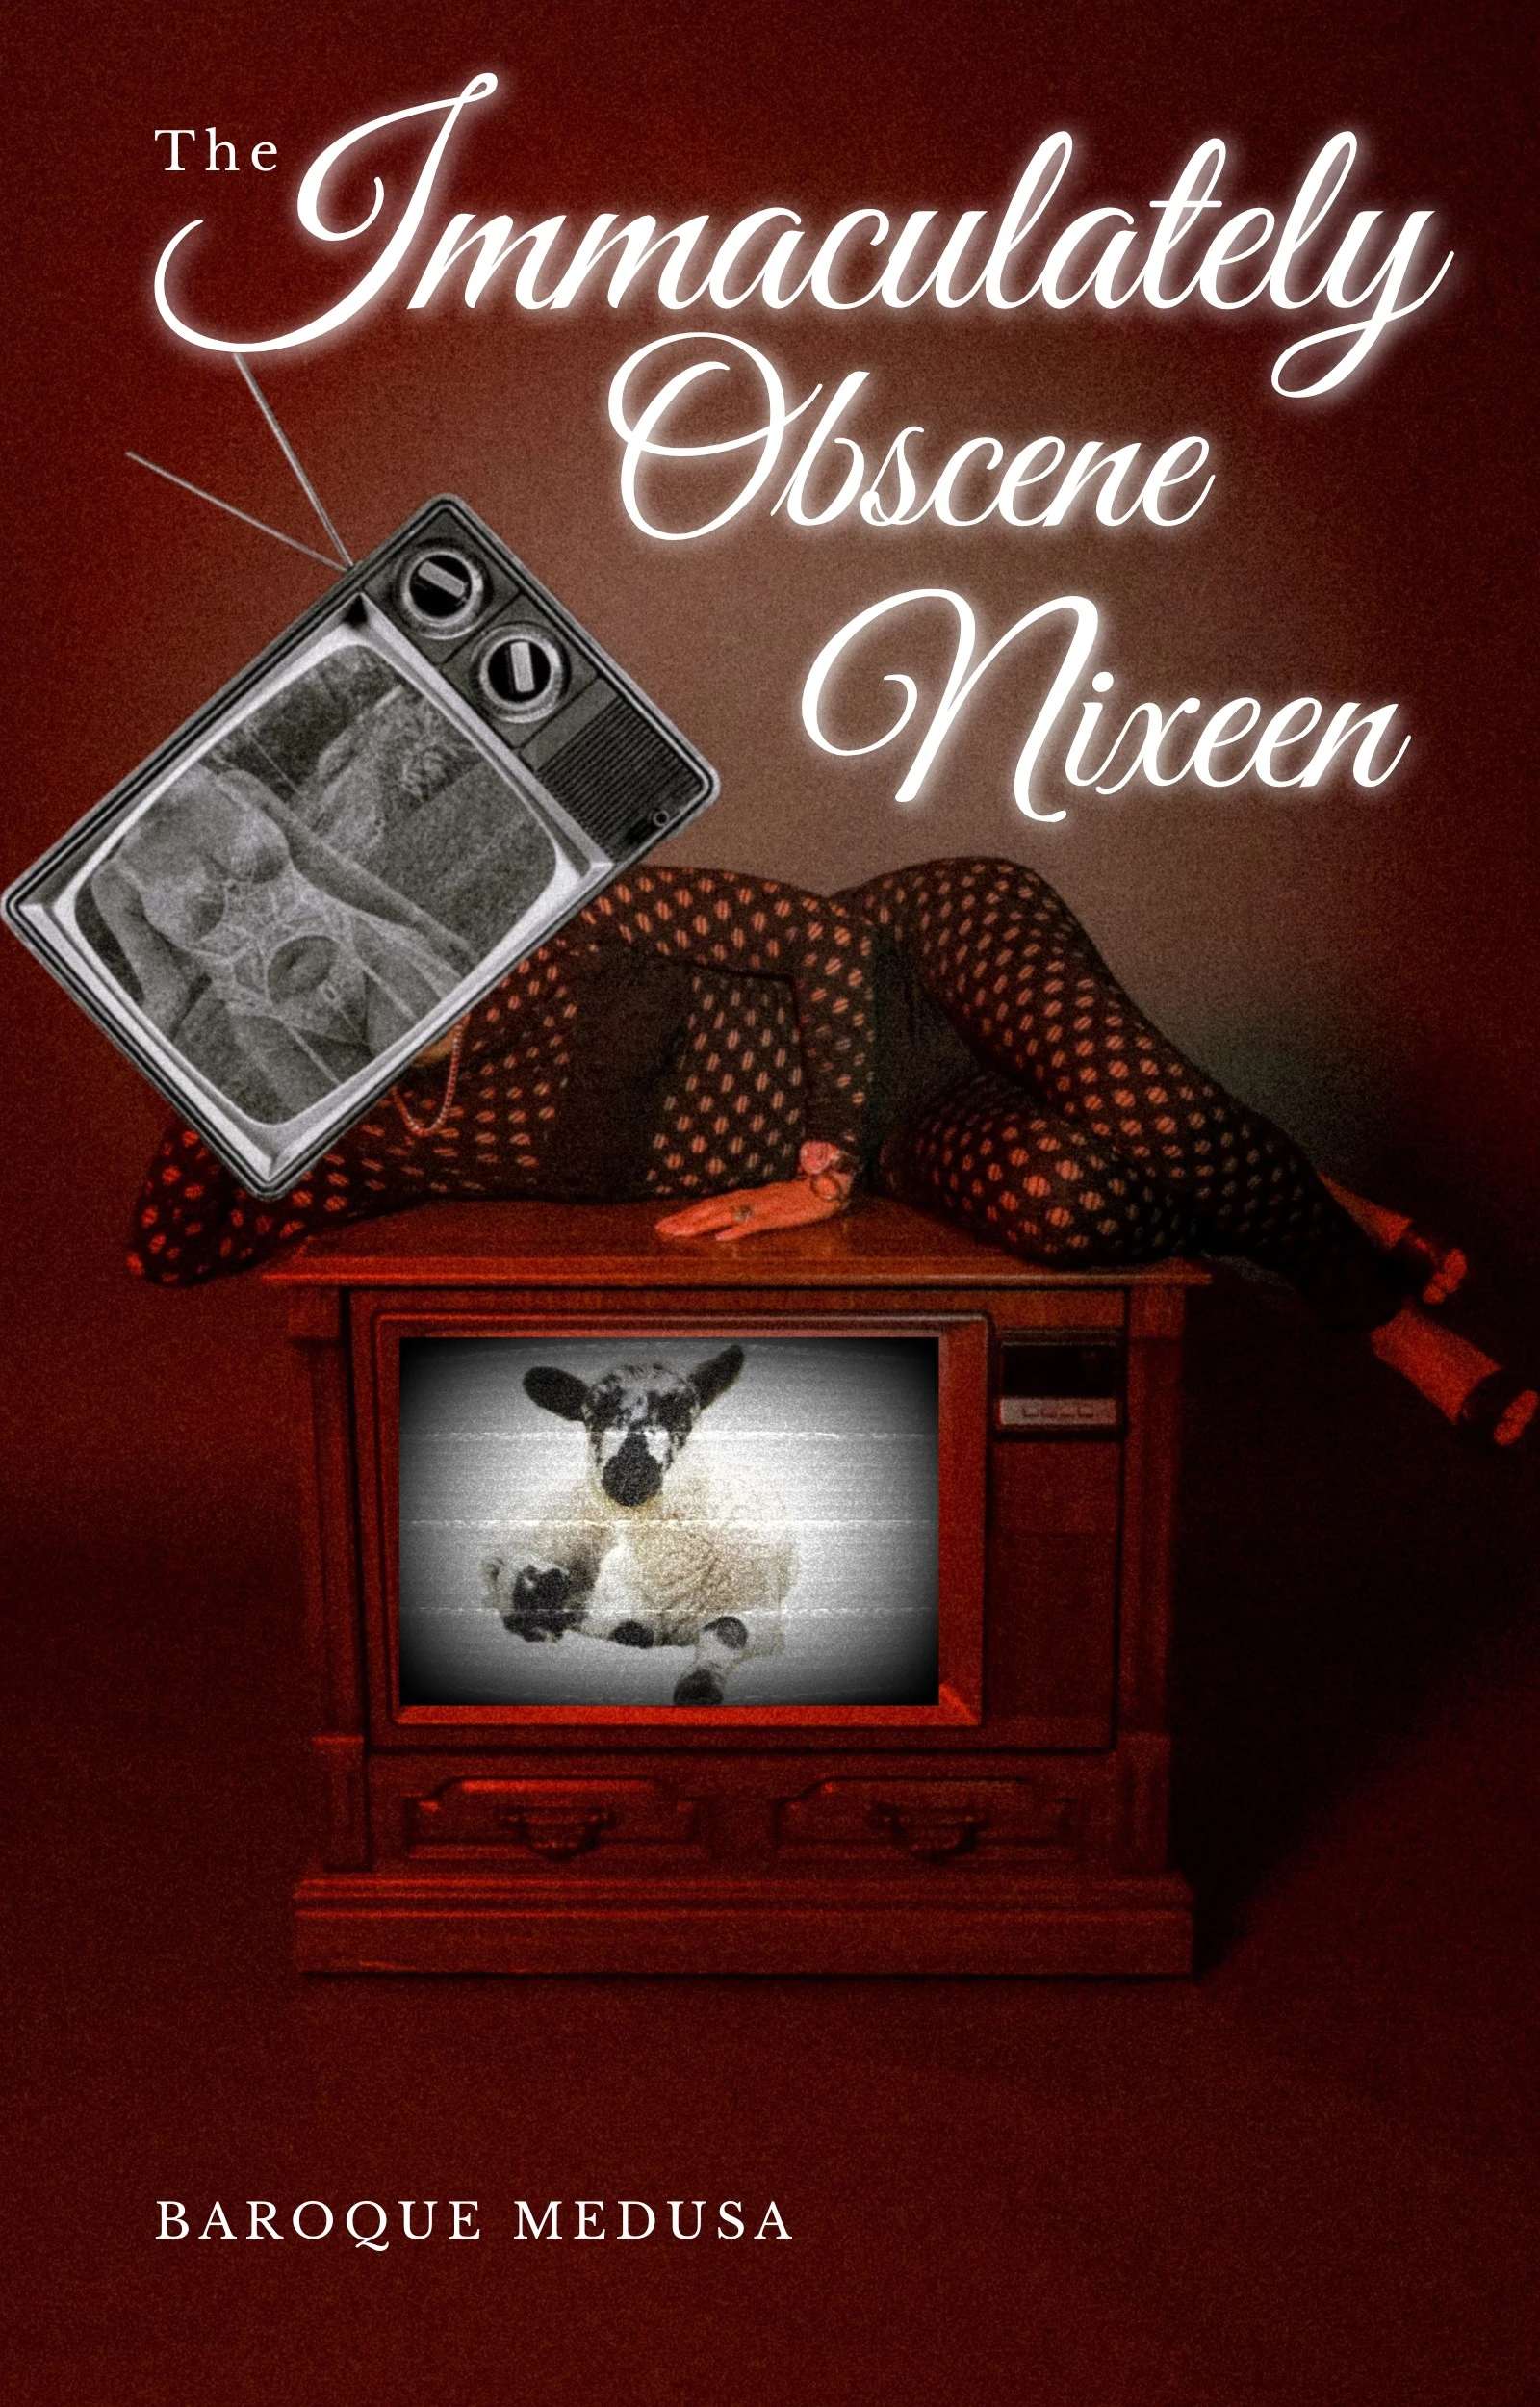 The Immaculately Obscene Nixeen: A Dark Odyssey Restoring Primal Passions in a Post-Pandemic World